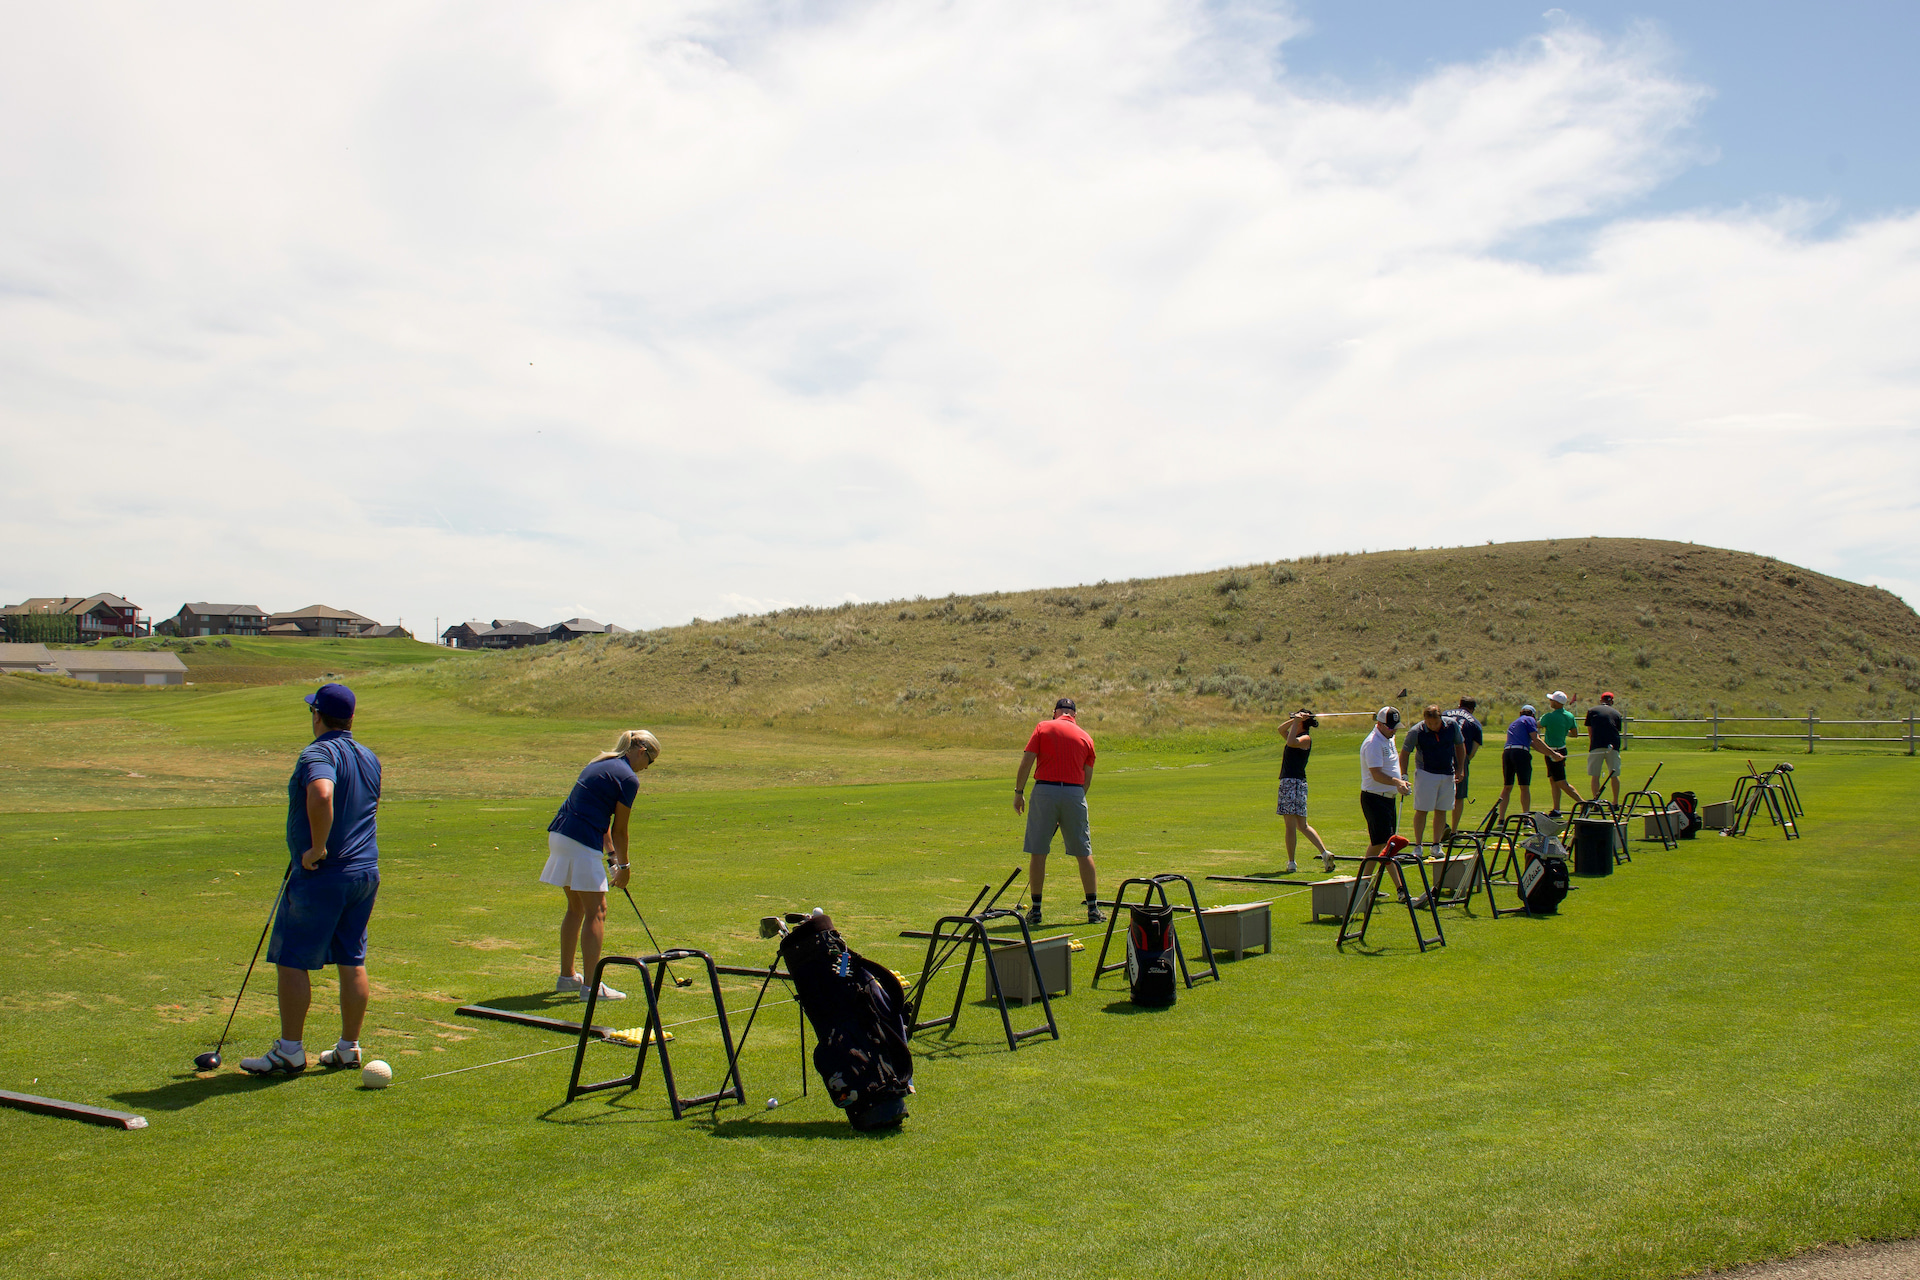 multiple golfers practicing on the grass driving range at desert blume golf course